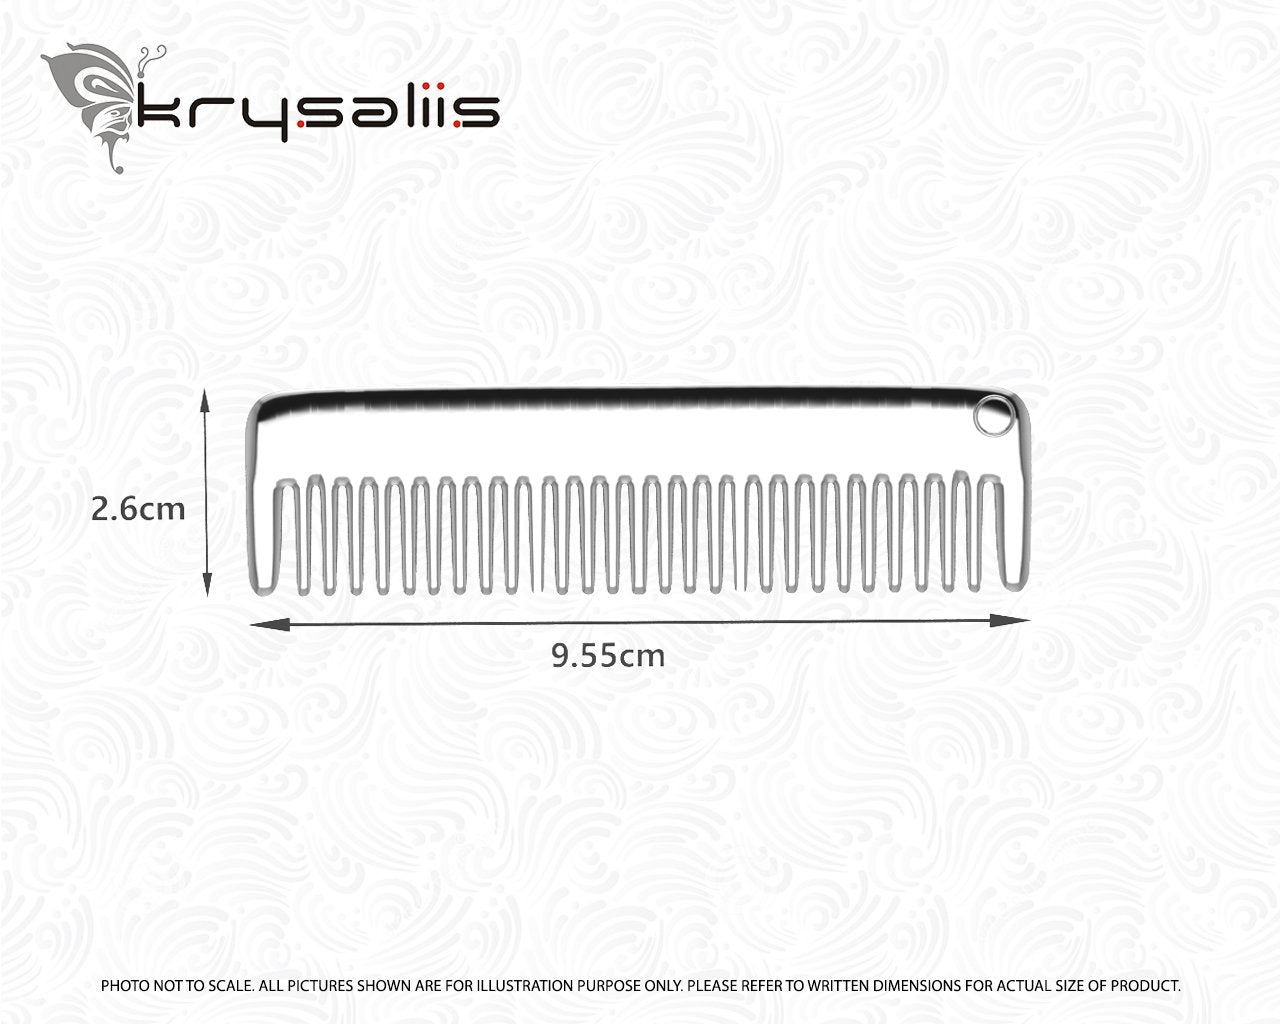 Krysaliis Sterling Silver Baby Comb - All Silver Gifts